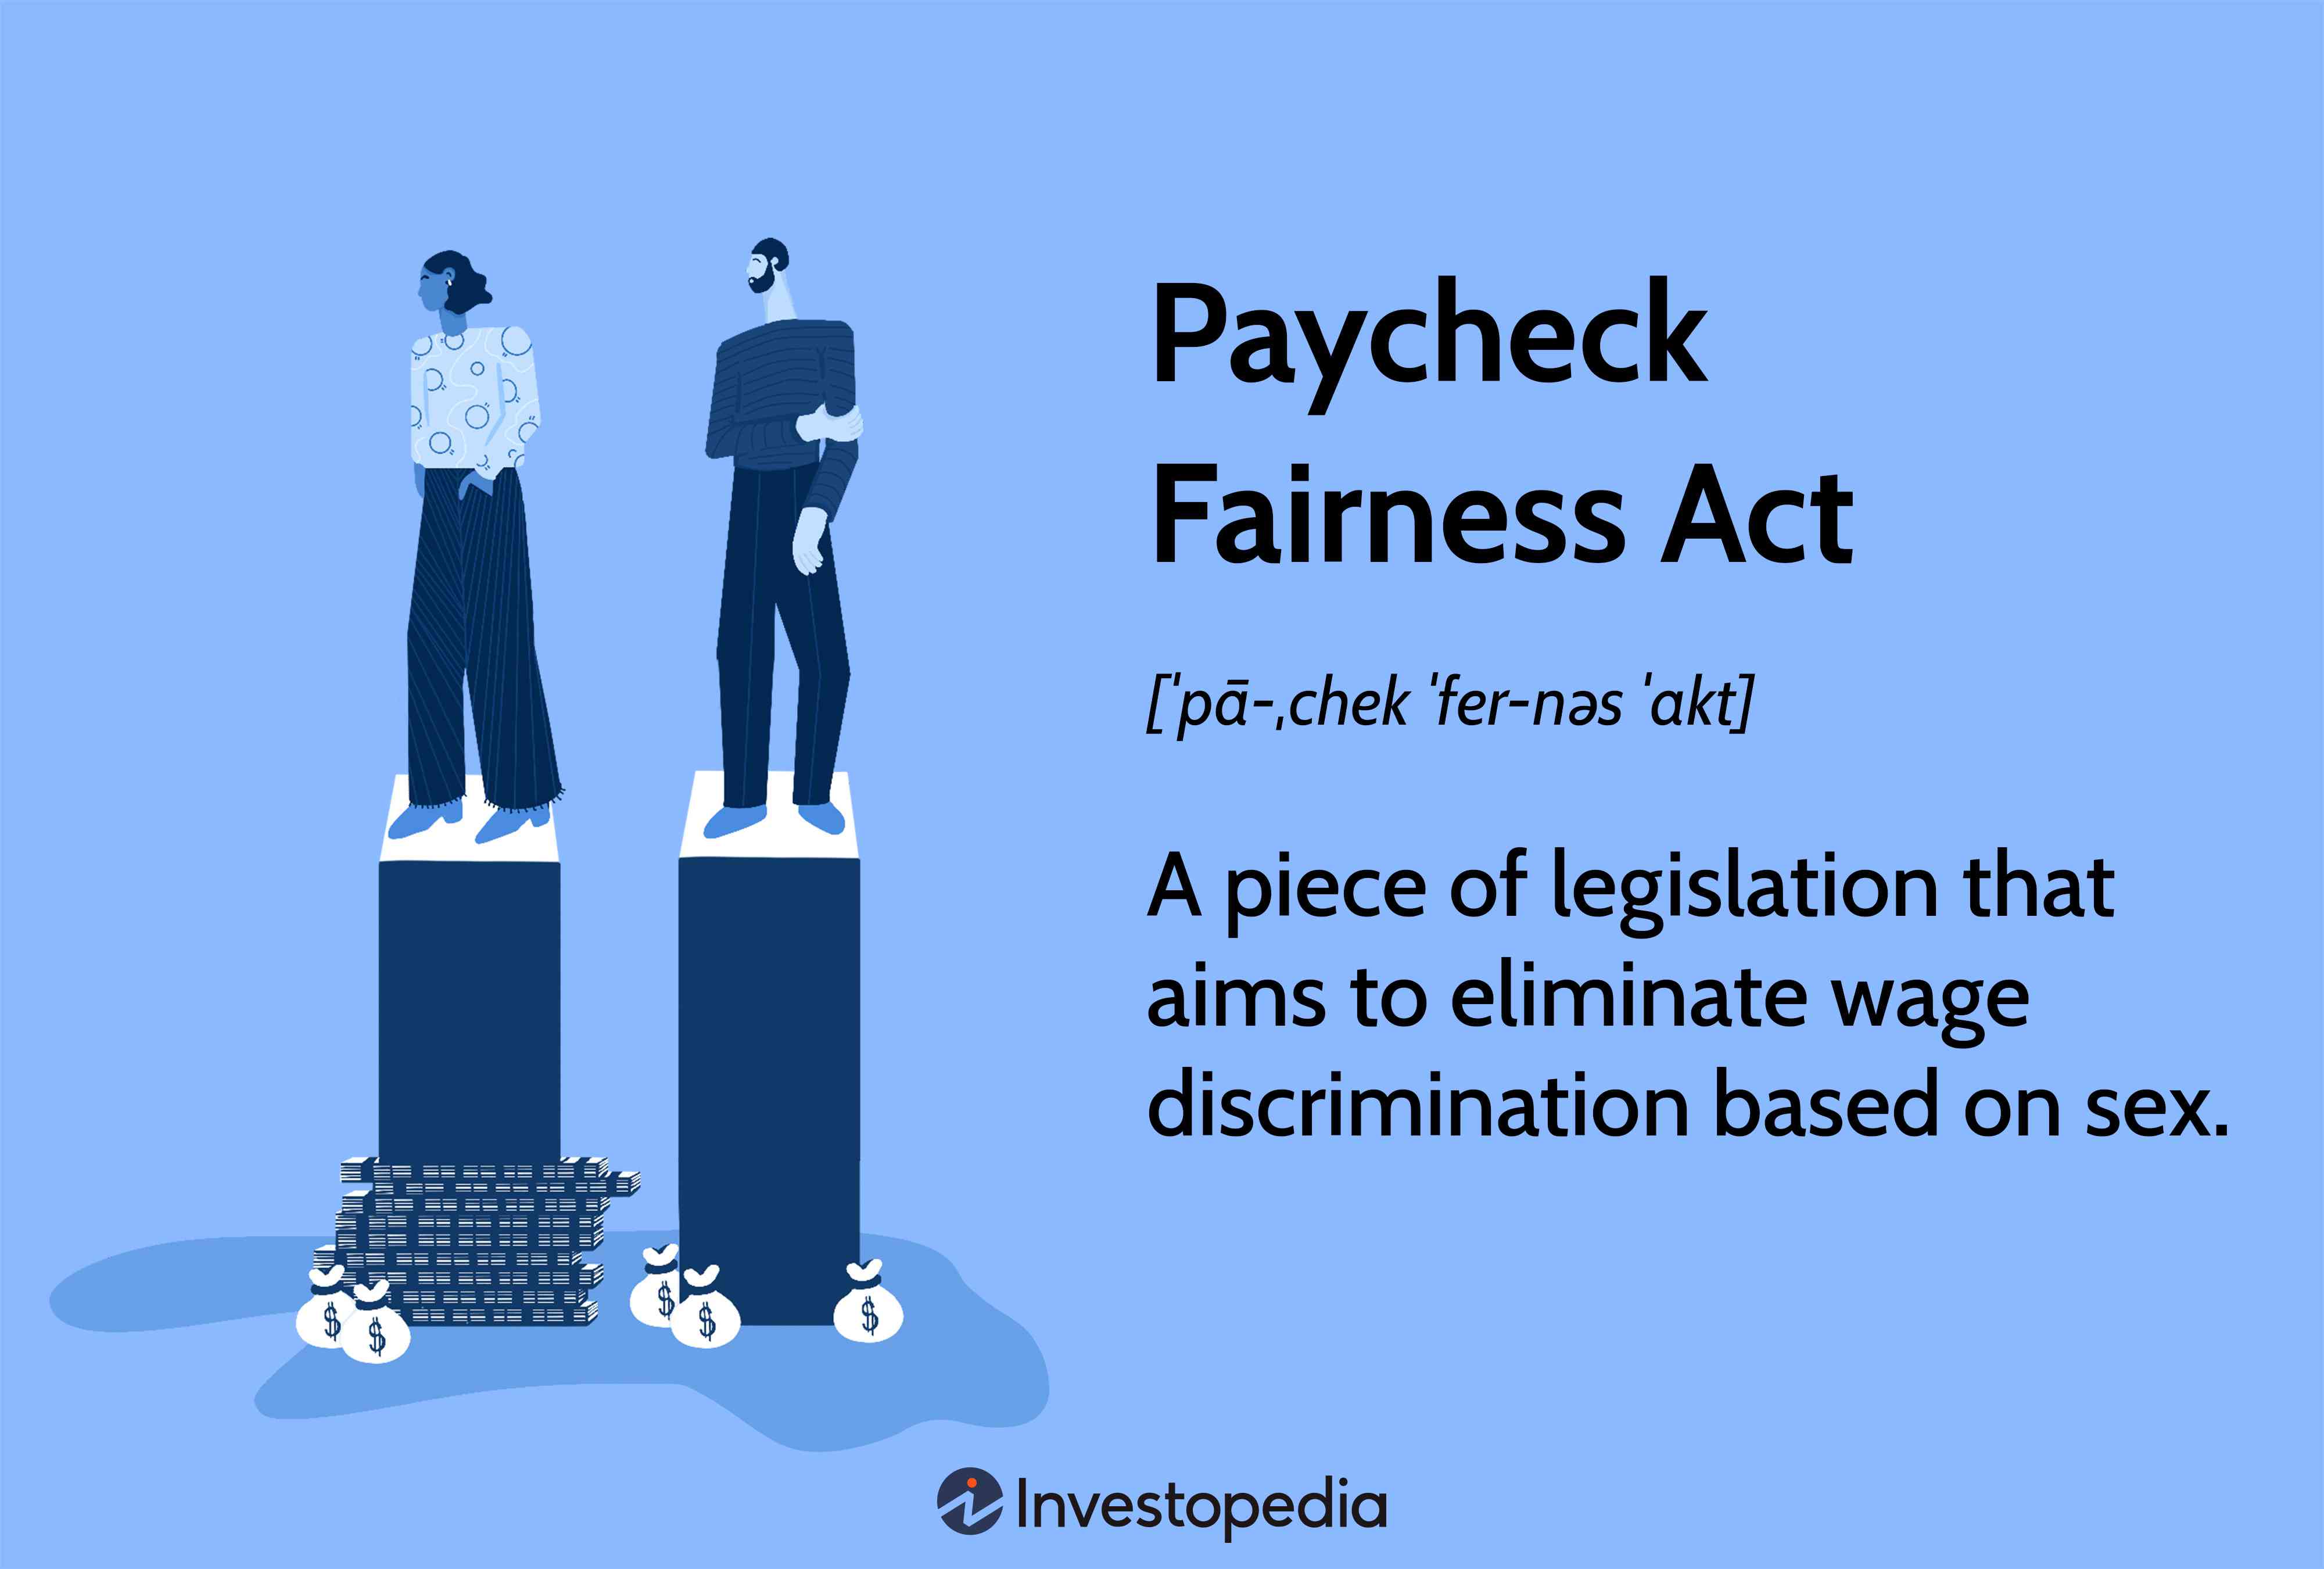 Paycheck Fairness Act: A piece of legislation that aims to eliminate wage discrimination based on sex.